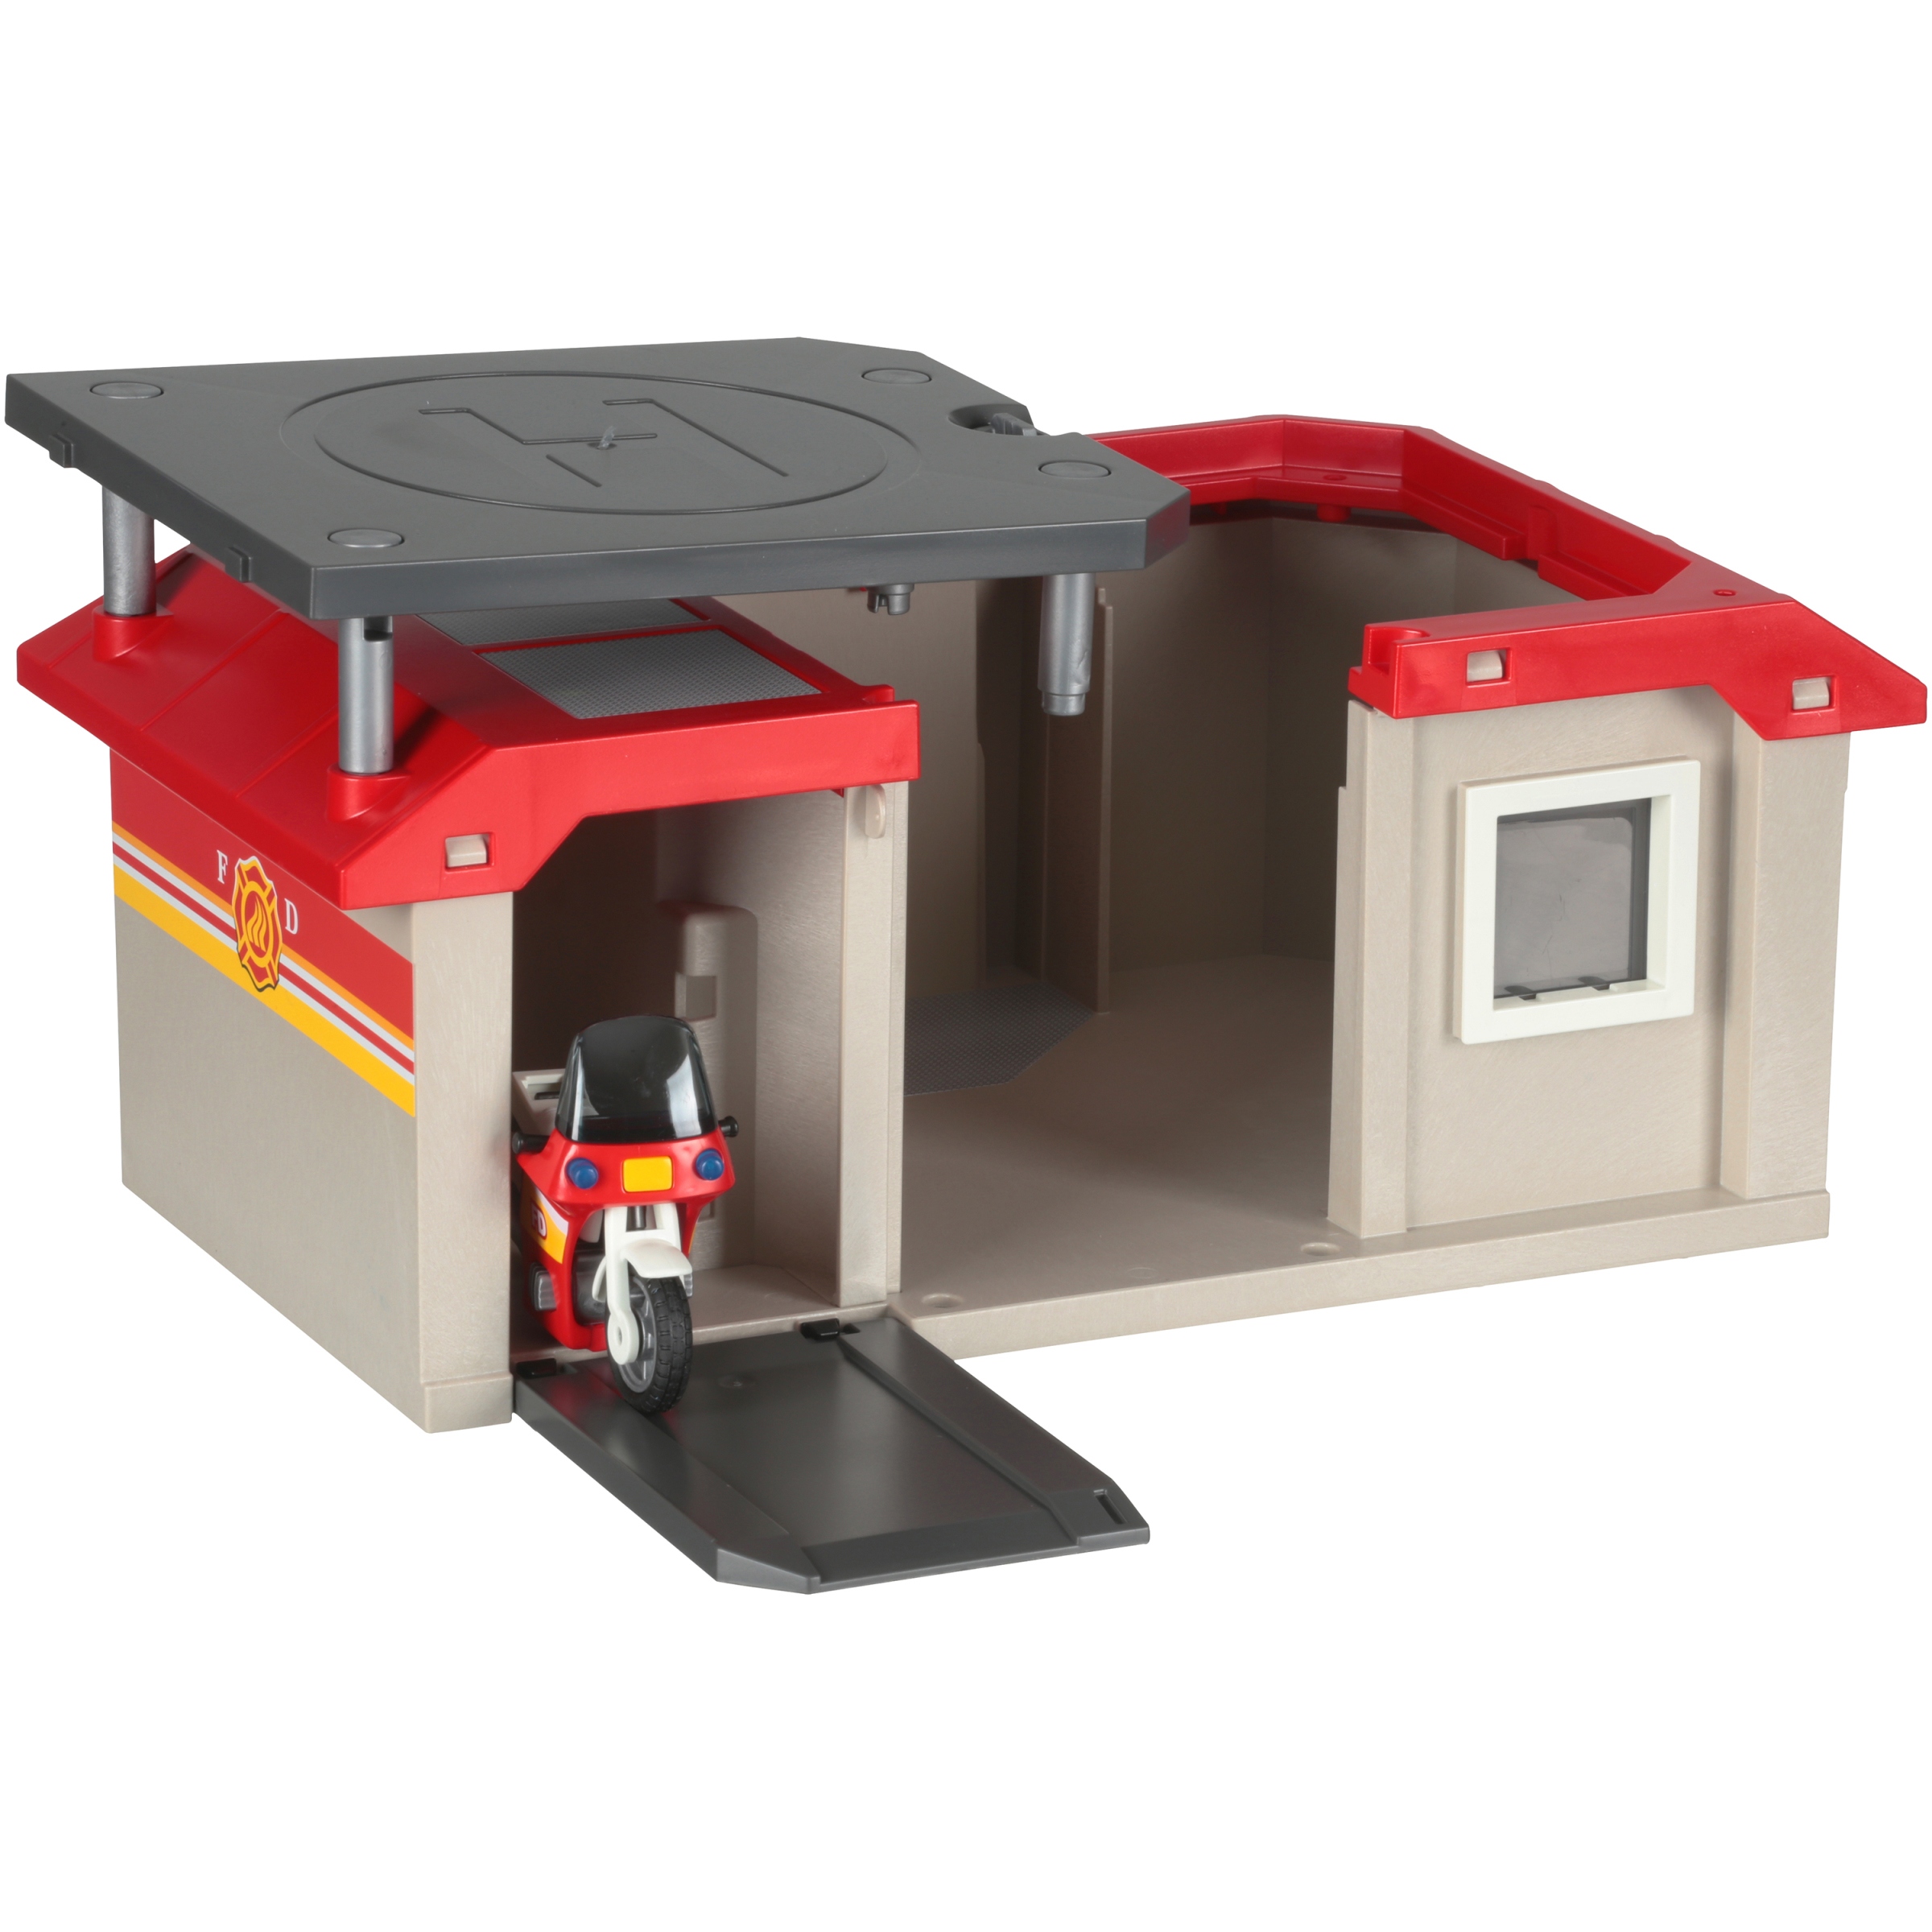 PLAYMOBIL Take Along Fire Station - image 1 of 6